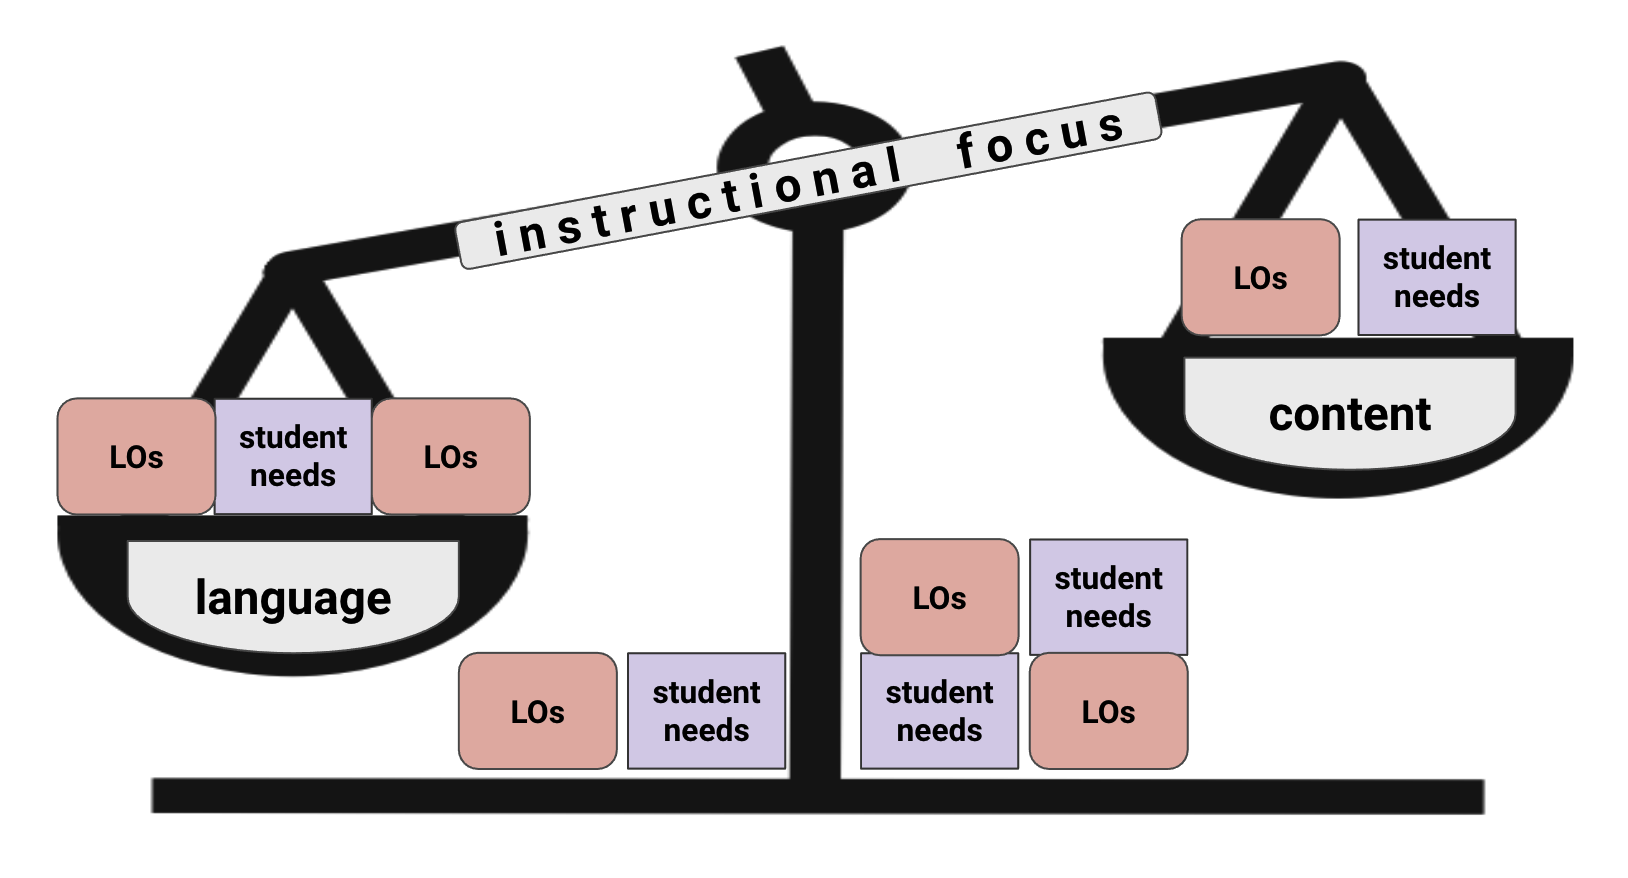 language-content integration: balance shifts depending on learning objectives, student needs, etc.